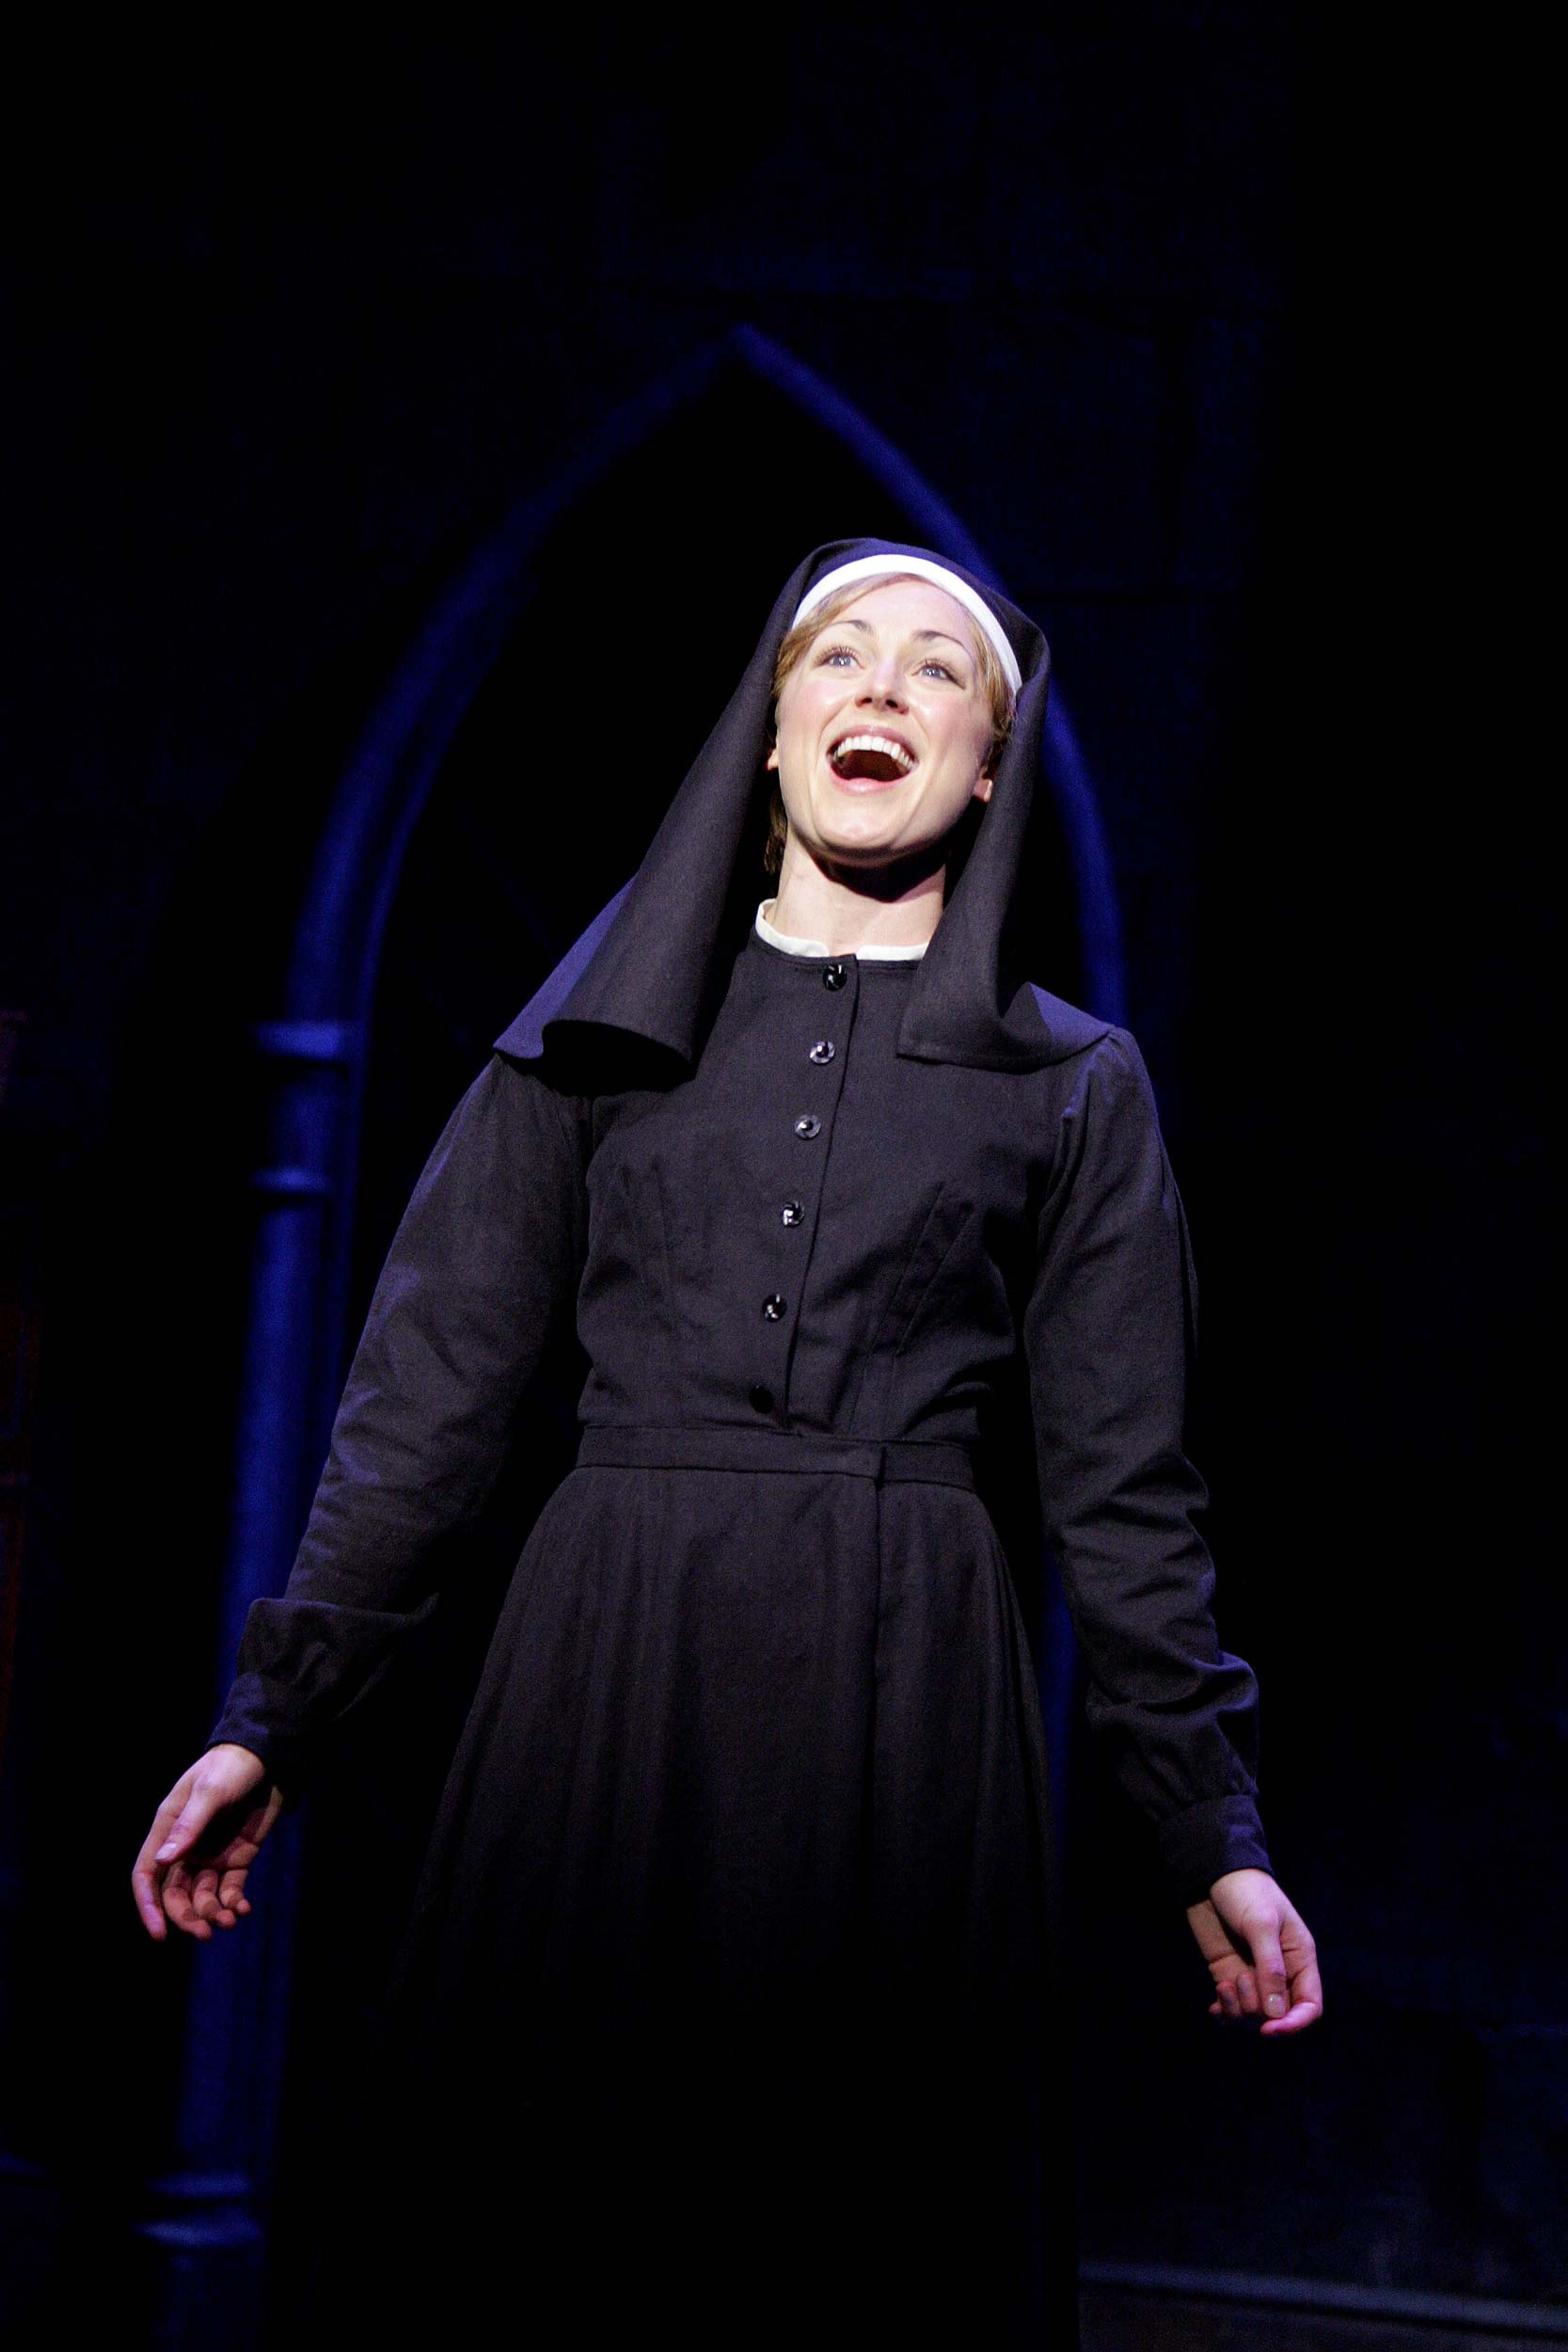 A photo from the 2006 West End production of The Sound of Music.